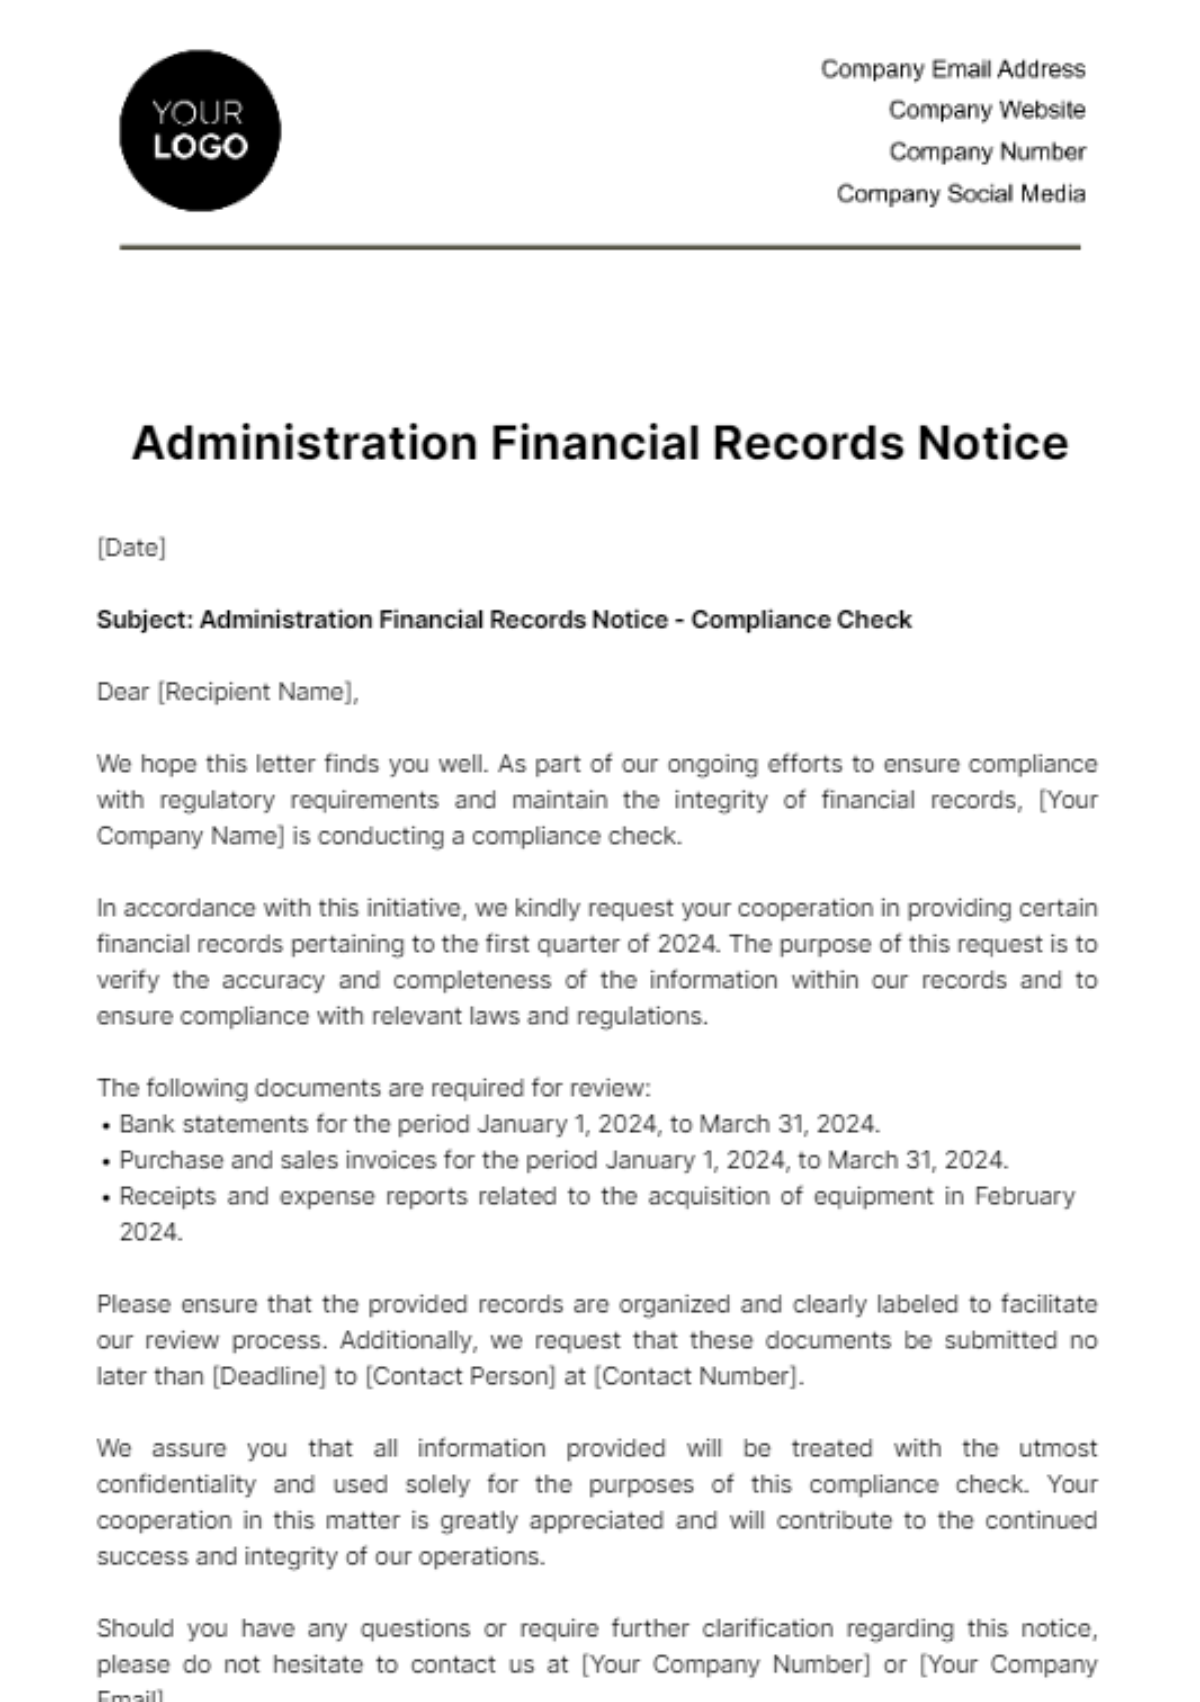 Administration Financial Records Notice Template